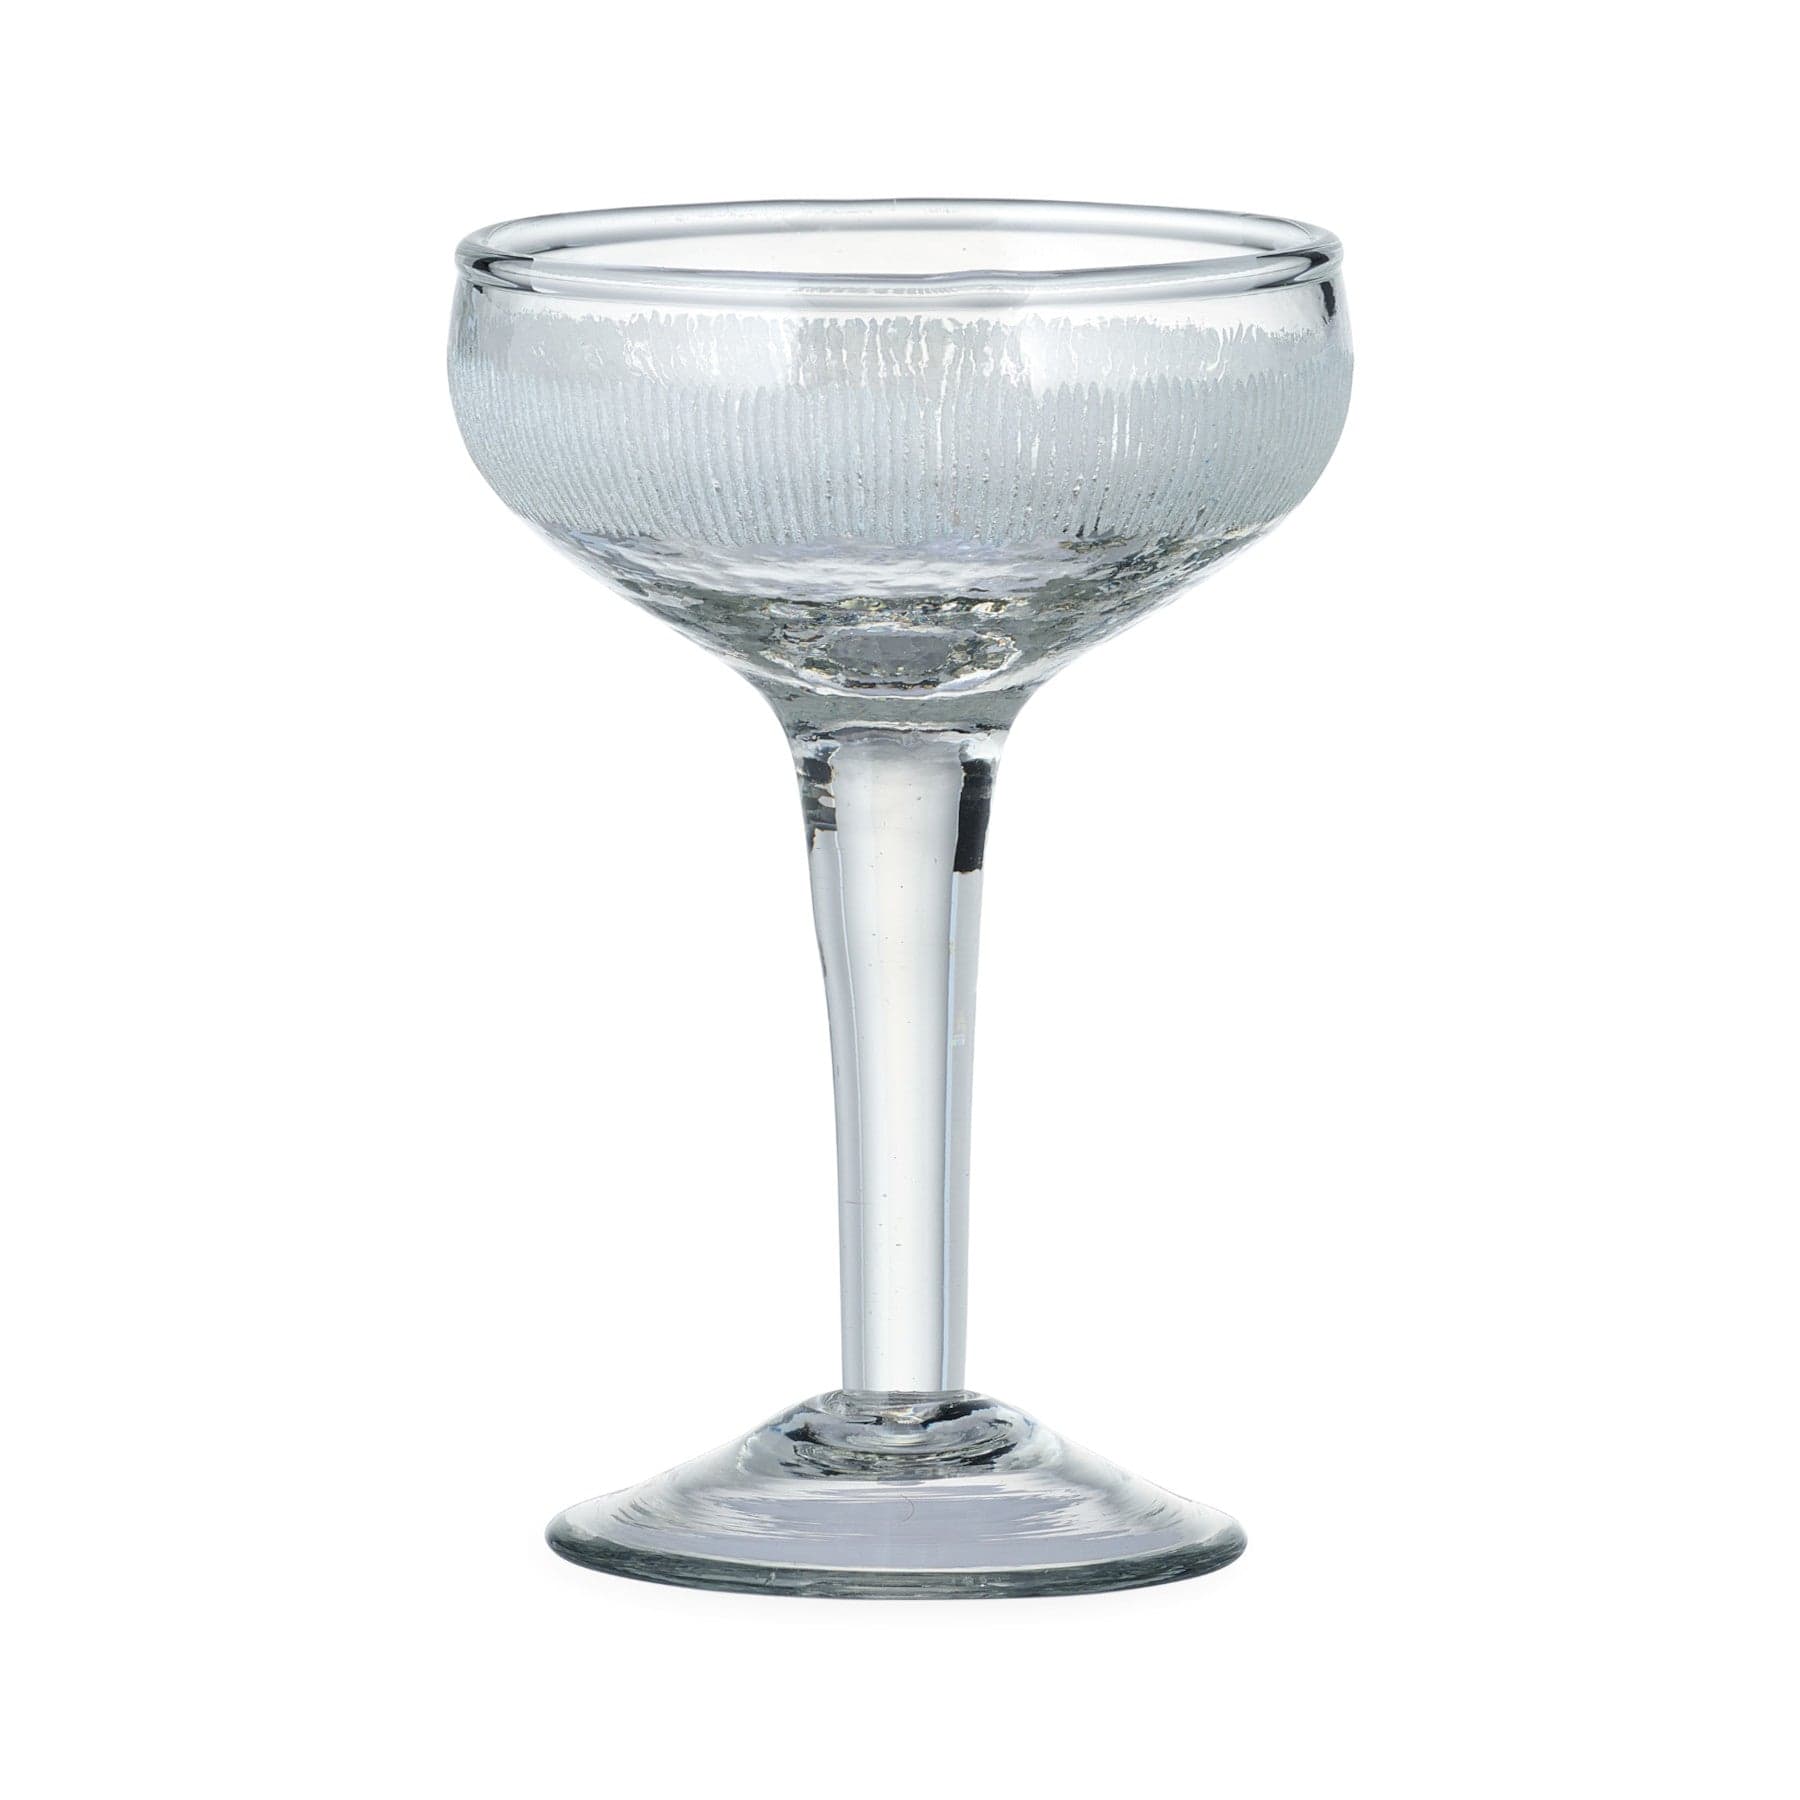 Anara etched cocktail glass